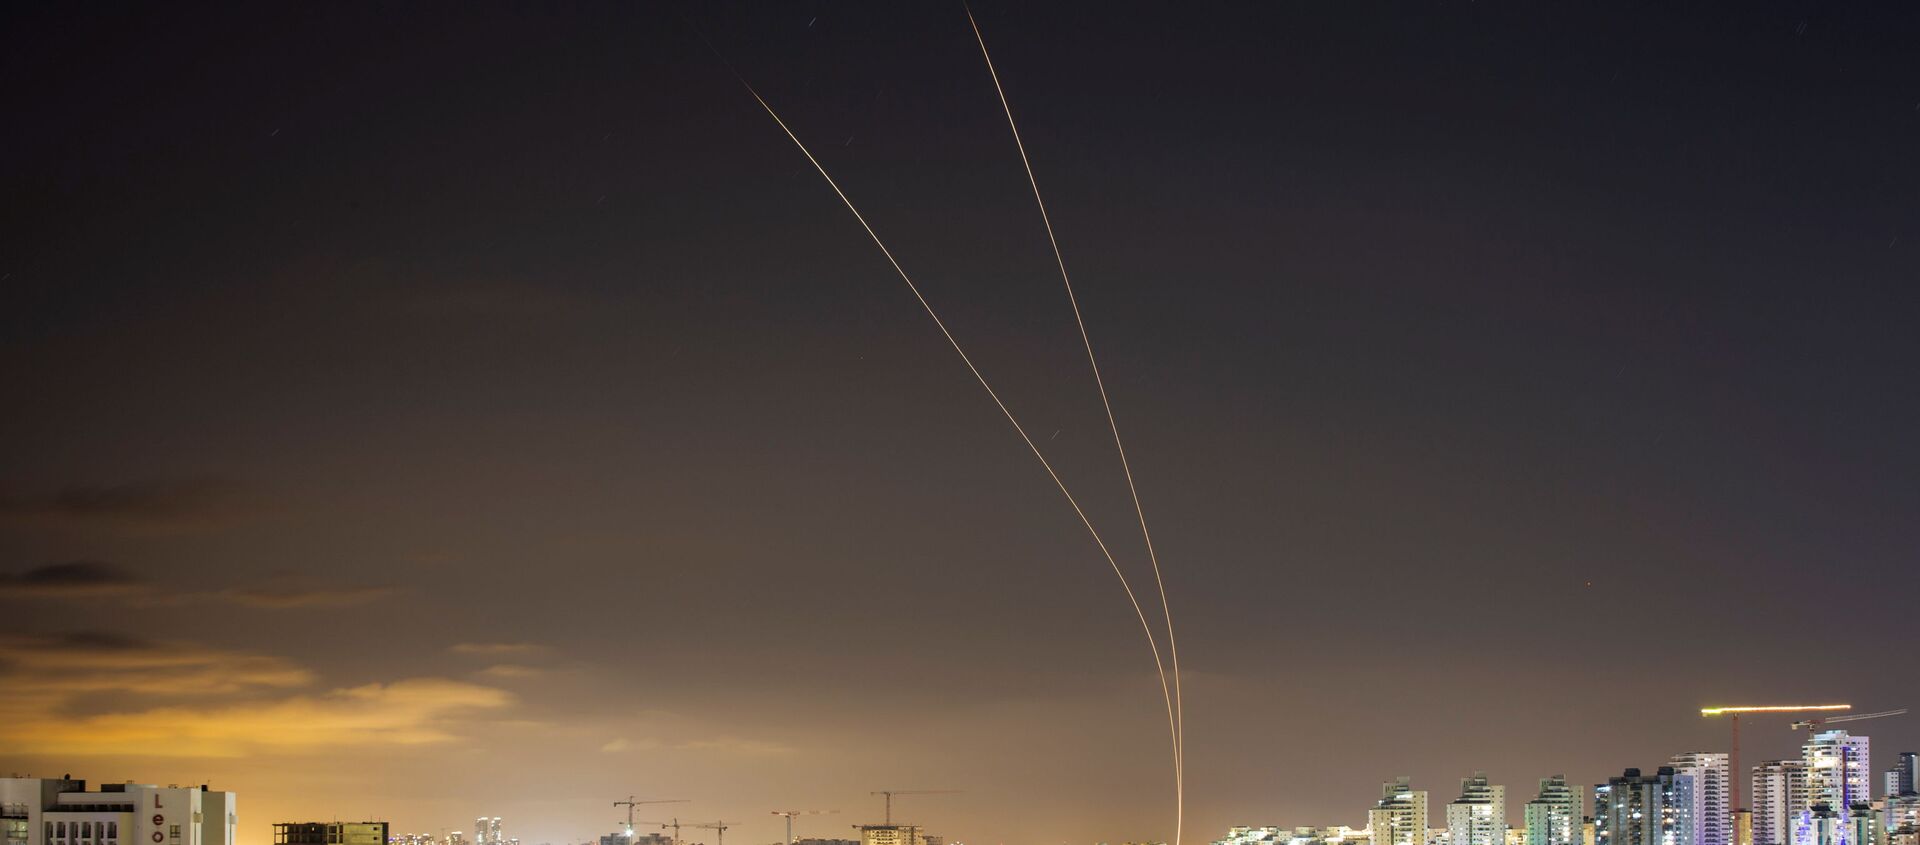 Streaks of light are seen as Israel's Iron Dome anti-missile system aims to intercept rockets launched from the Gaza Strip towards Israel, as seen from Ashkelon, Israel May 14, 2021. - Sputnik International, 1920